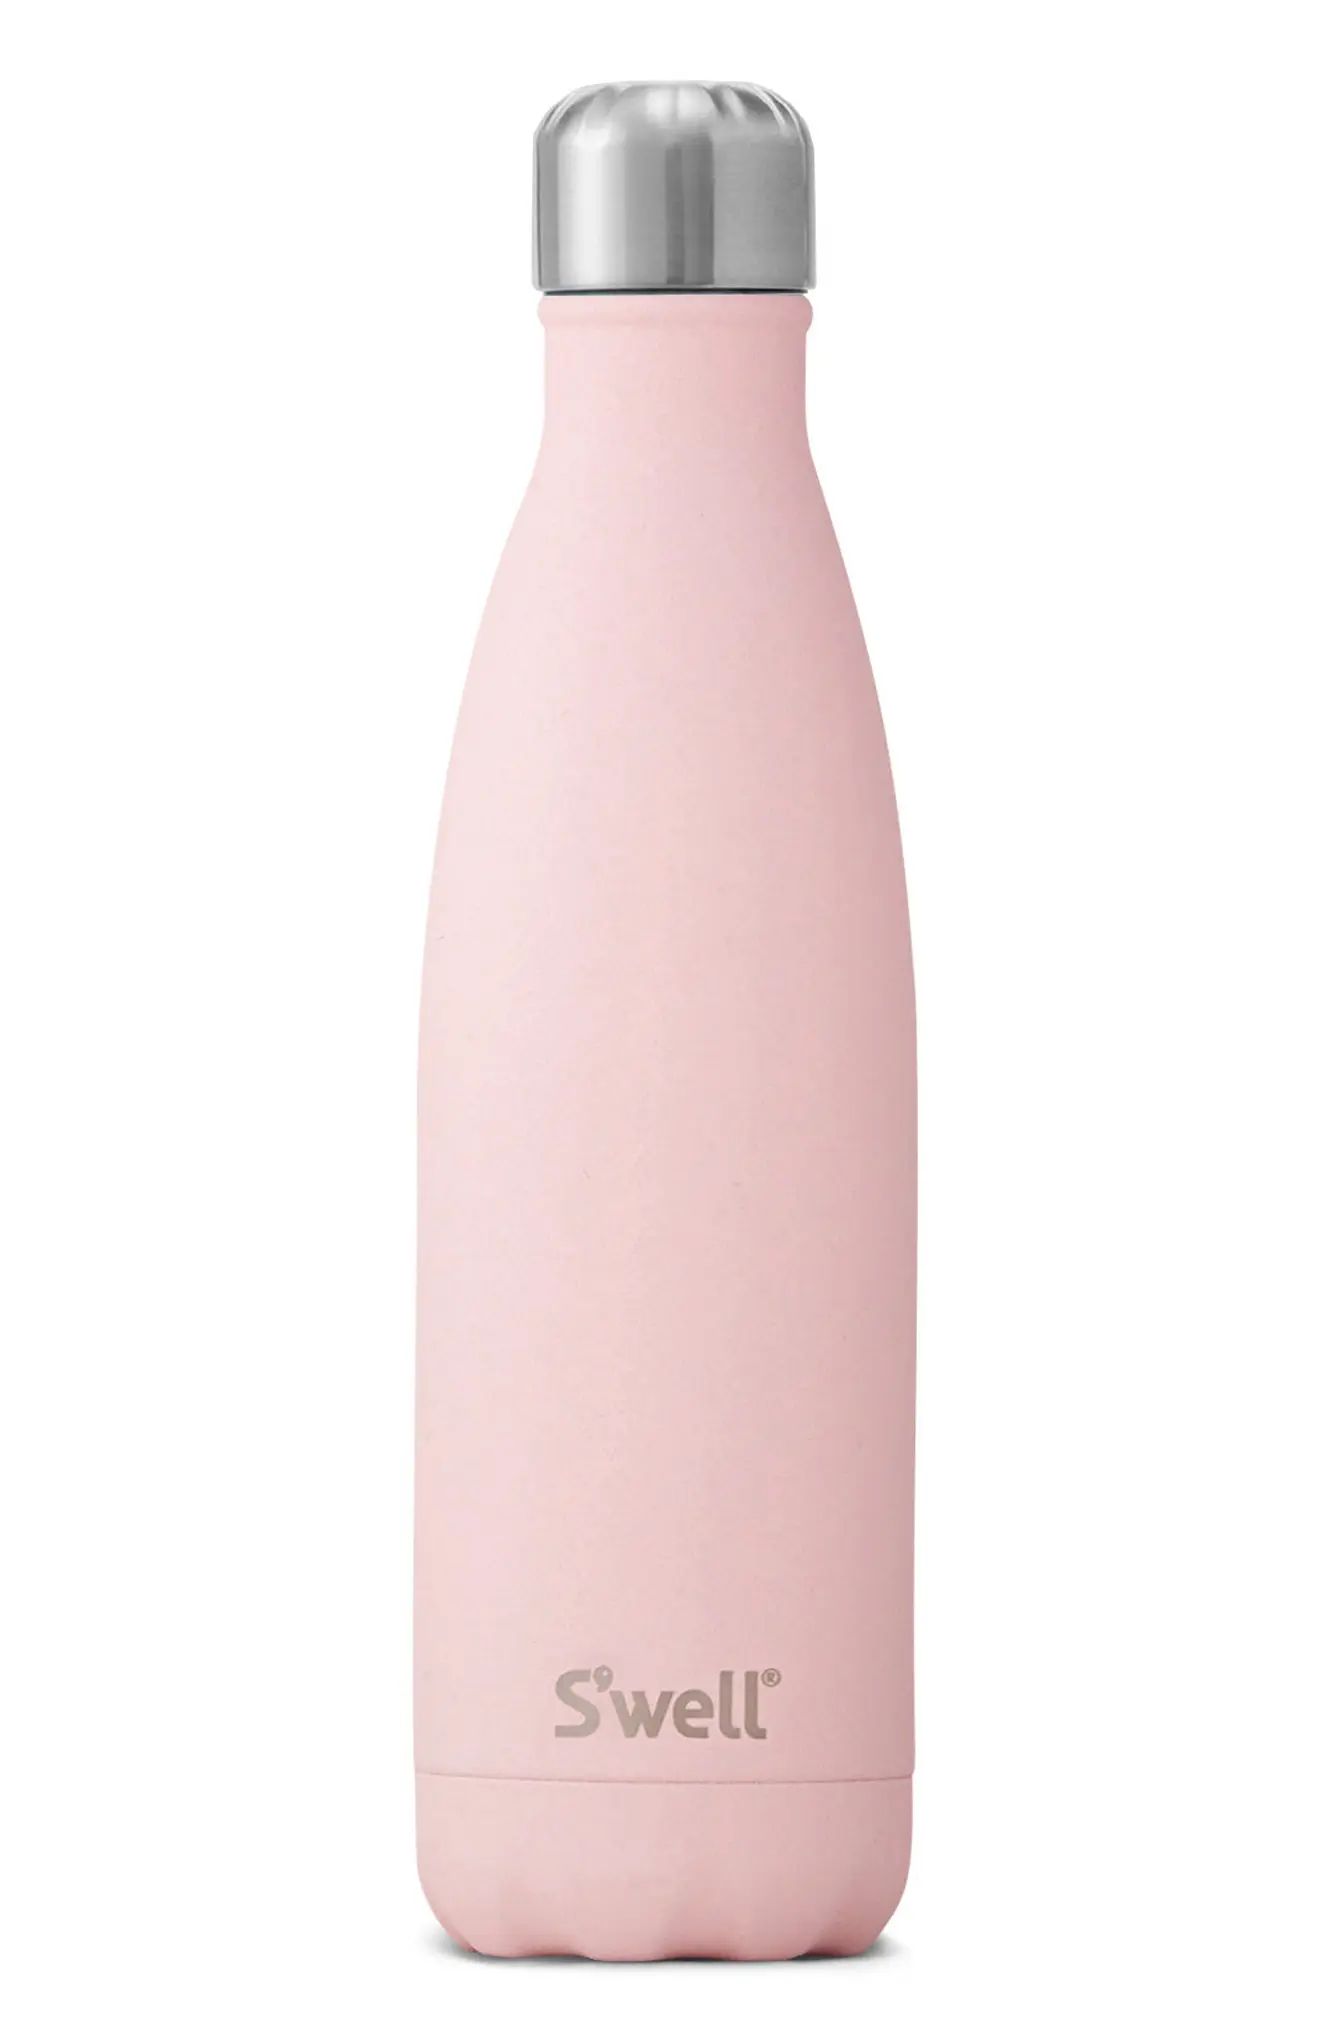 Swell Pink Topaz Insulated Stainless Steel Water Bottle (Regular Retail Price: $35.00) | Nordstrom